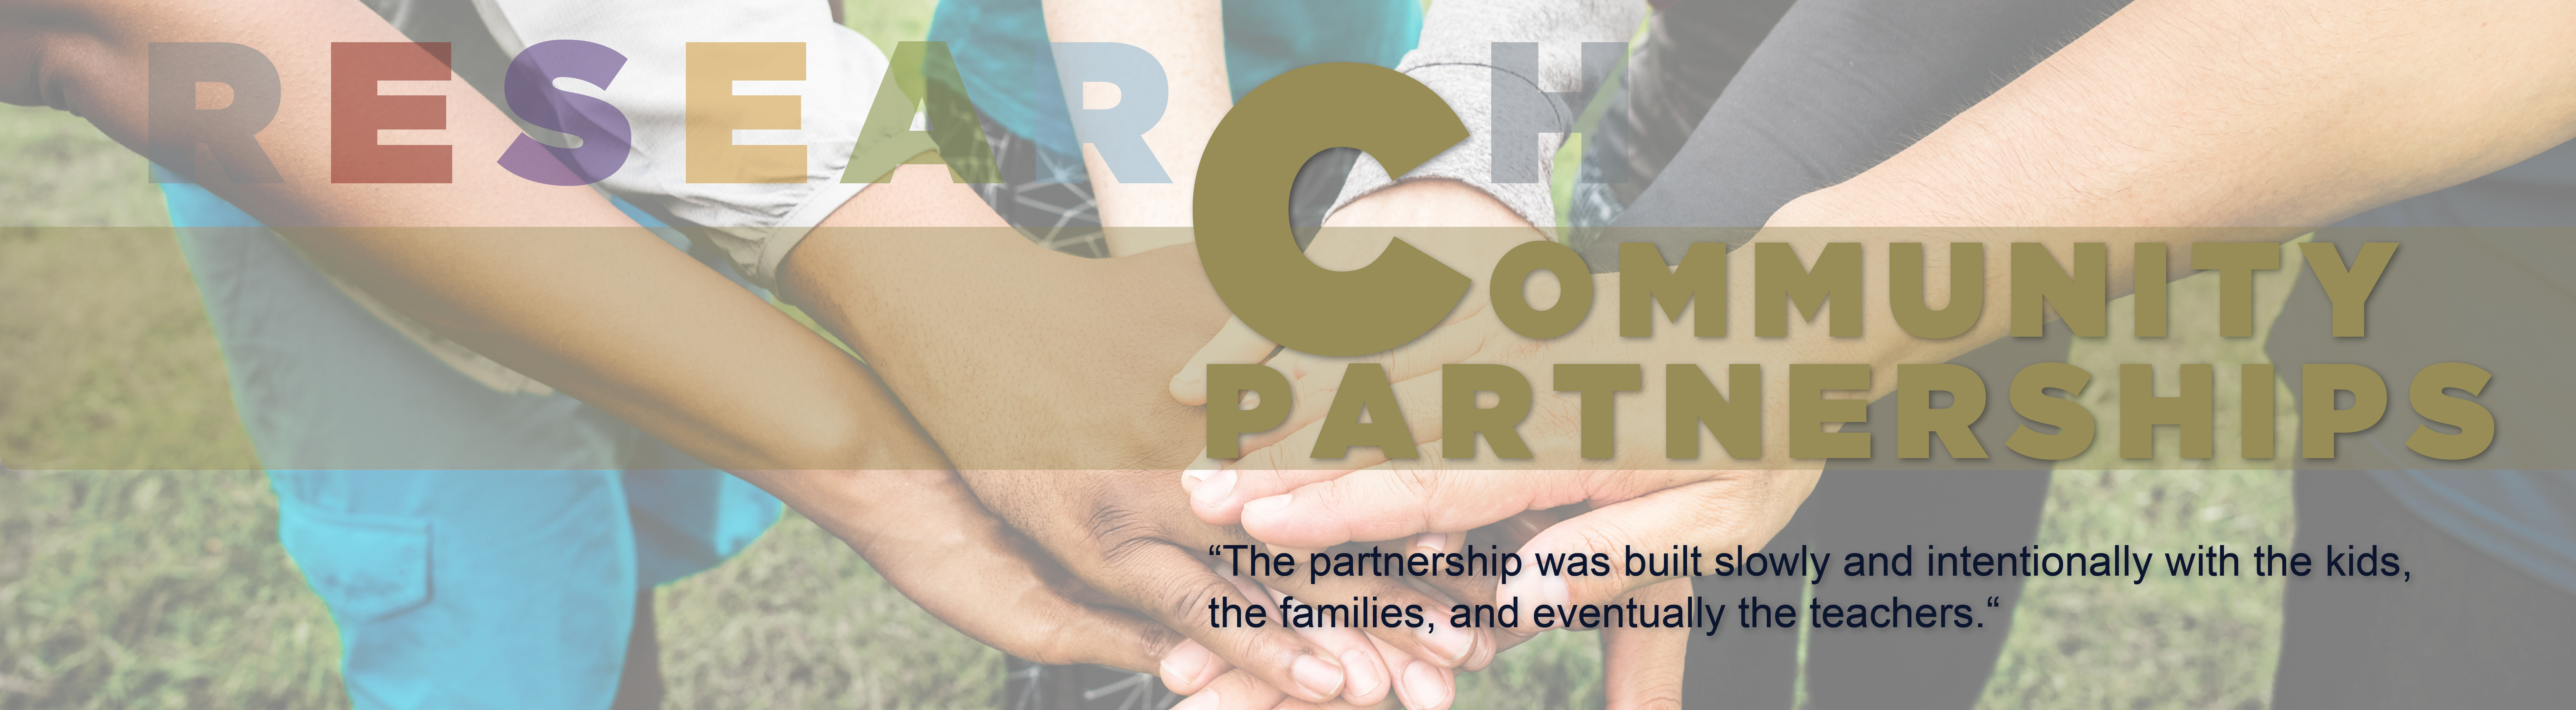 Community Partnerships: "The partnership was built slowly and intentionally with the kids, the families, and eventually the teachers" - Quote by Dr. Jennie McGarry and Dr. Justin Evanovich